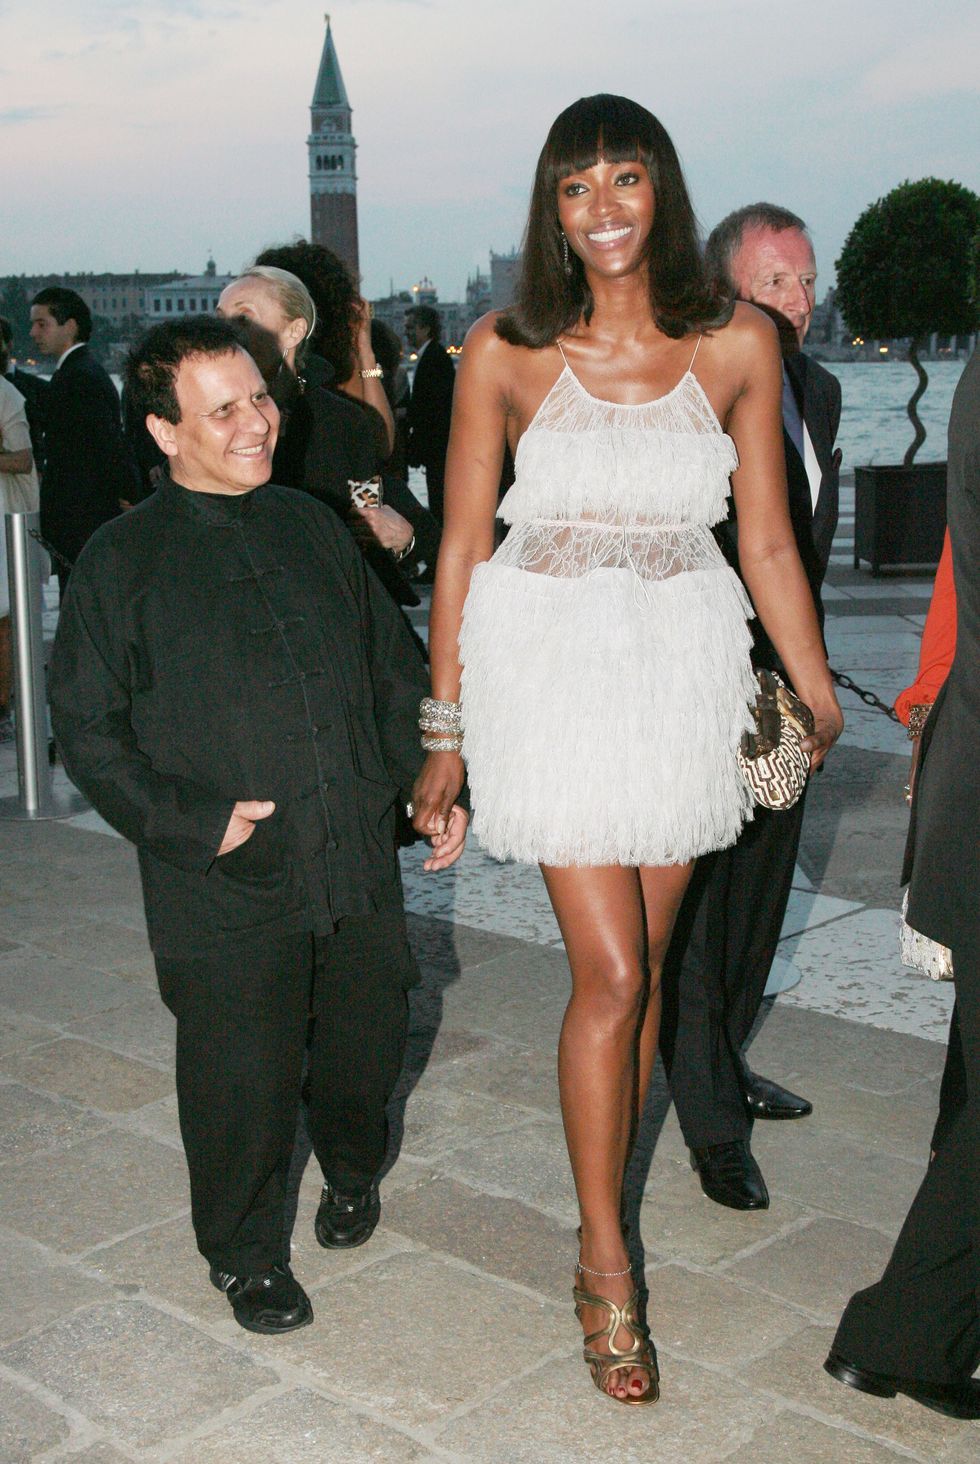 naomi campbell and azzedine alaia dinner given at the foundation giorgio cini isola di san giorgio for the exhibition sequence 1 painting and sculpture at the palazzo grassi during the biennale of venice 2007 photo by bertrand rindoff petroffgetty images